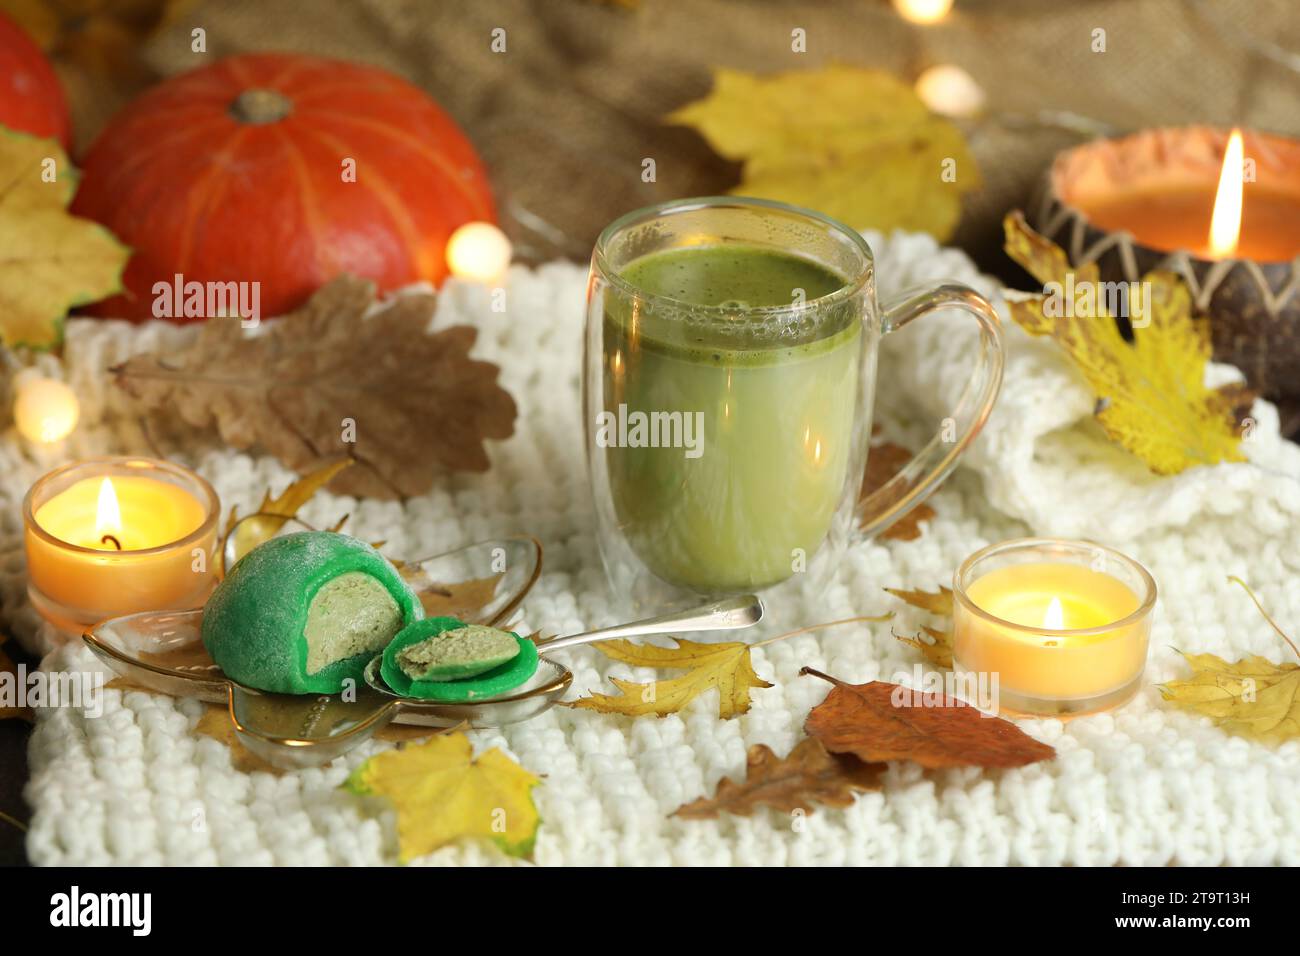 Colorful japanese sweets daifuku or mochi sliced. Sweets close up on the plate with cup of matcha tea Stock Photo